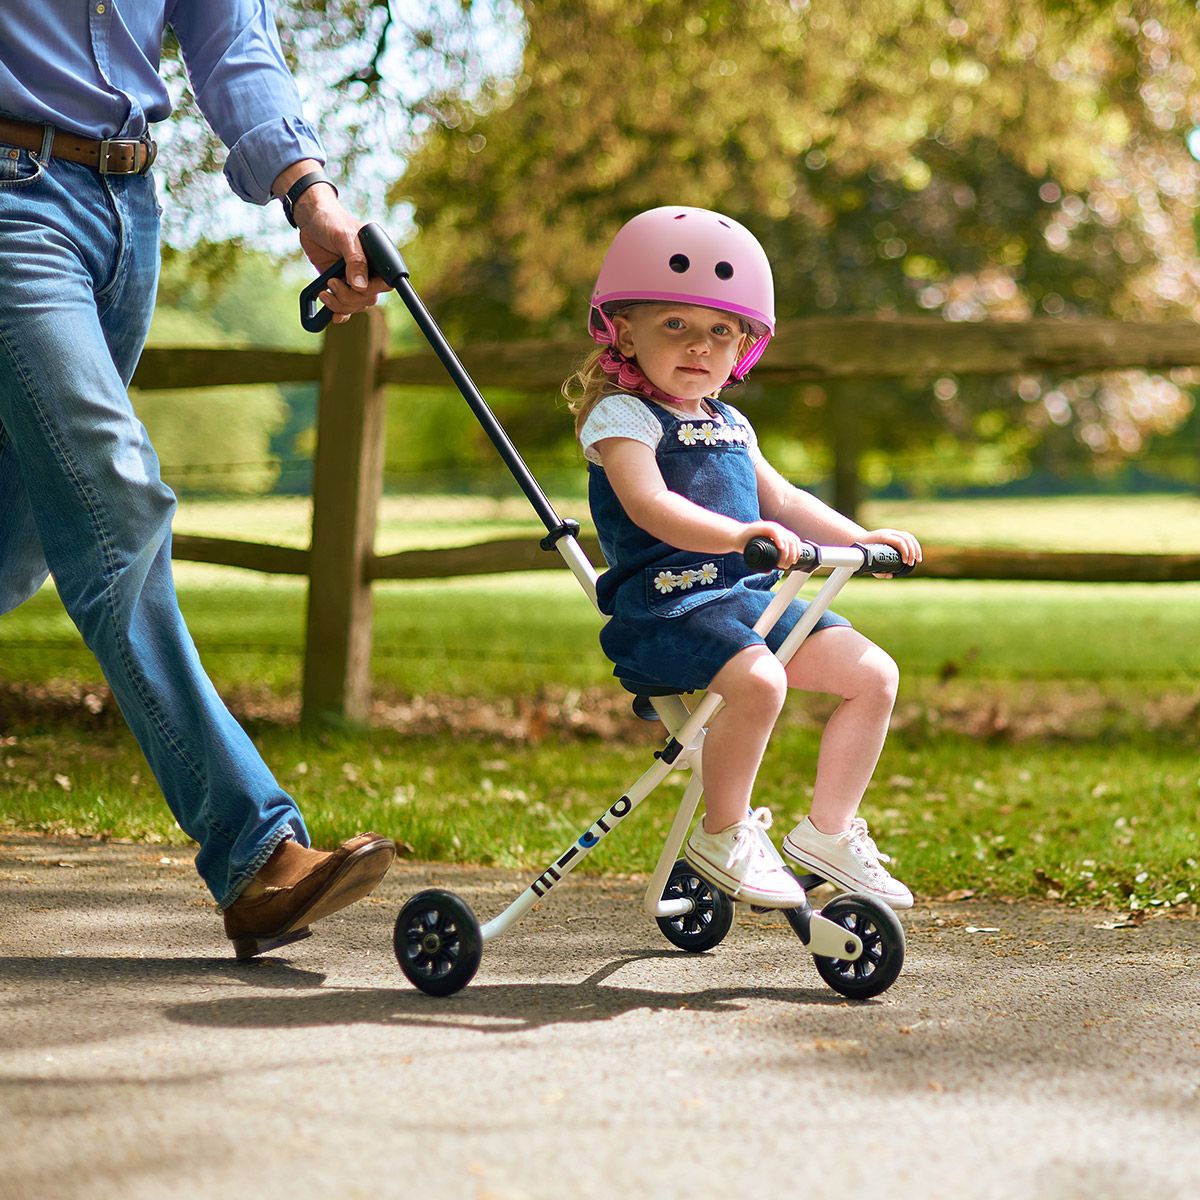 HOW THE TRIKE CAN HELP BOOST TODDLER INDEPENDENCE